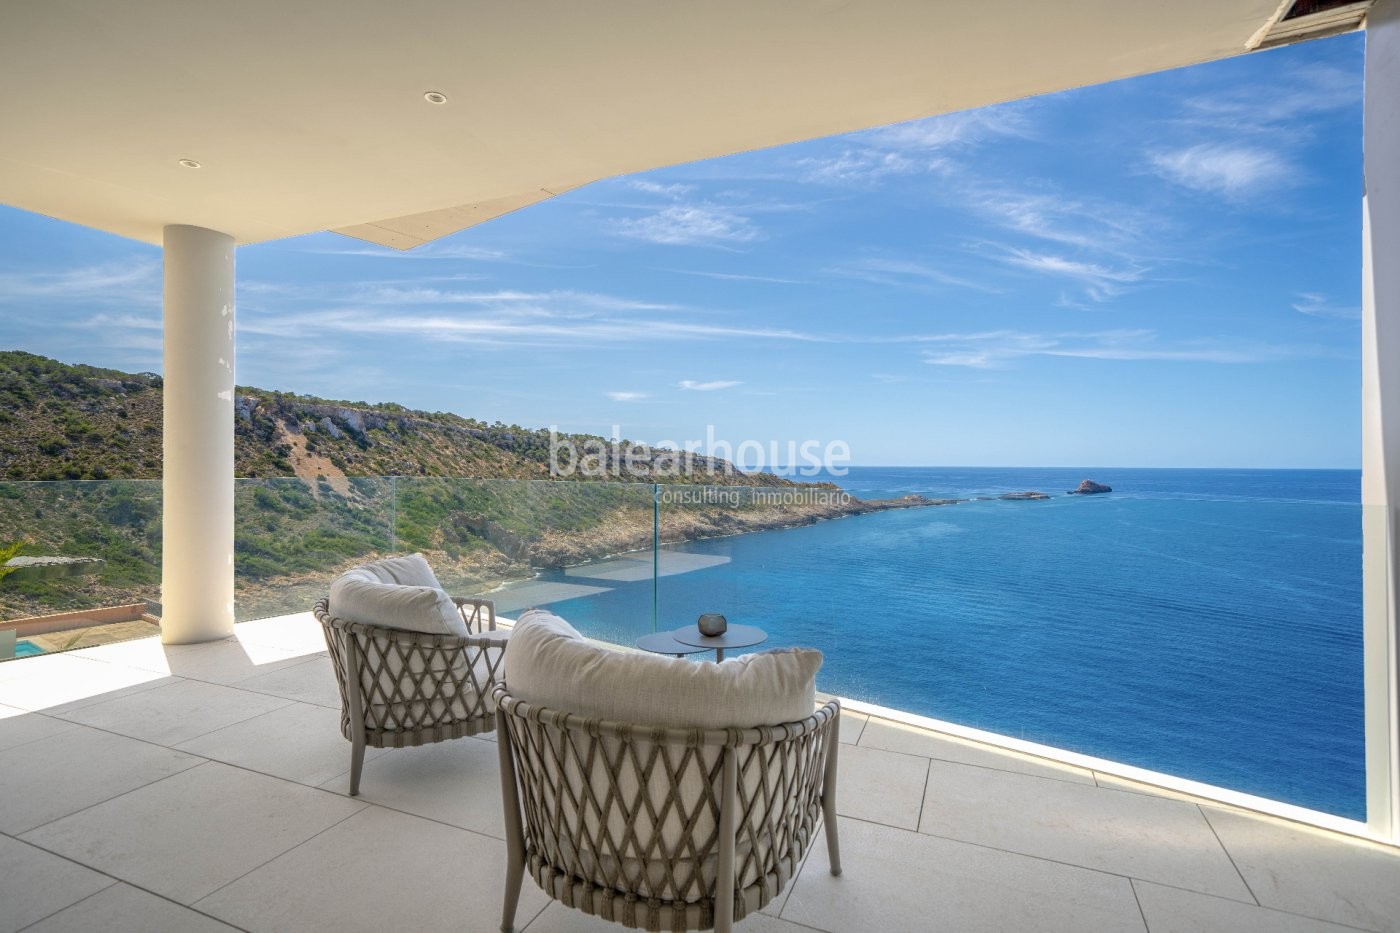 Impressive seafront villa with spectacular views of the Mediterranean near Port Adriano.